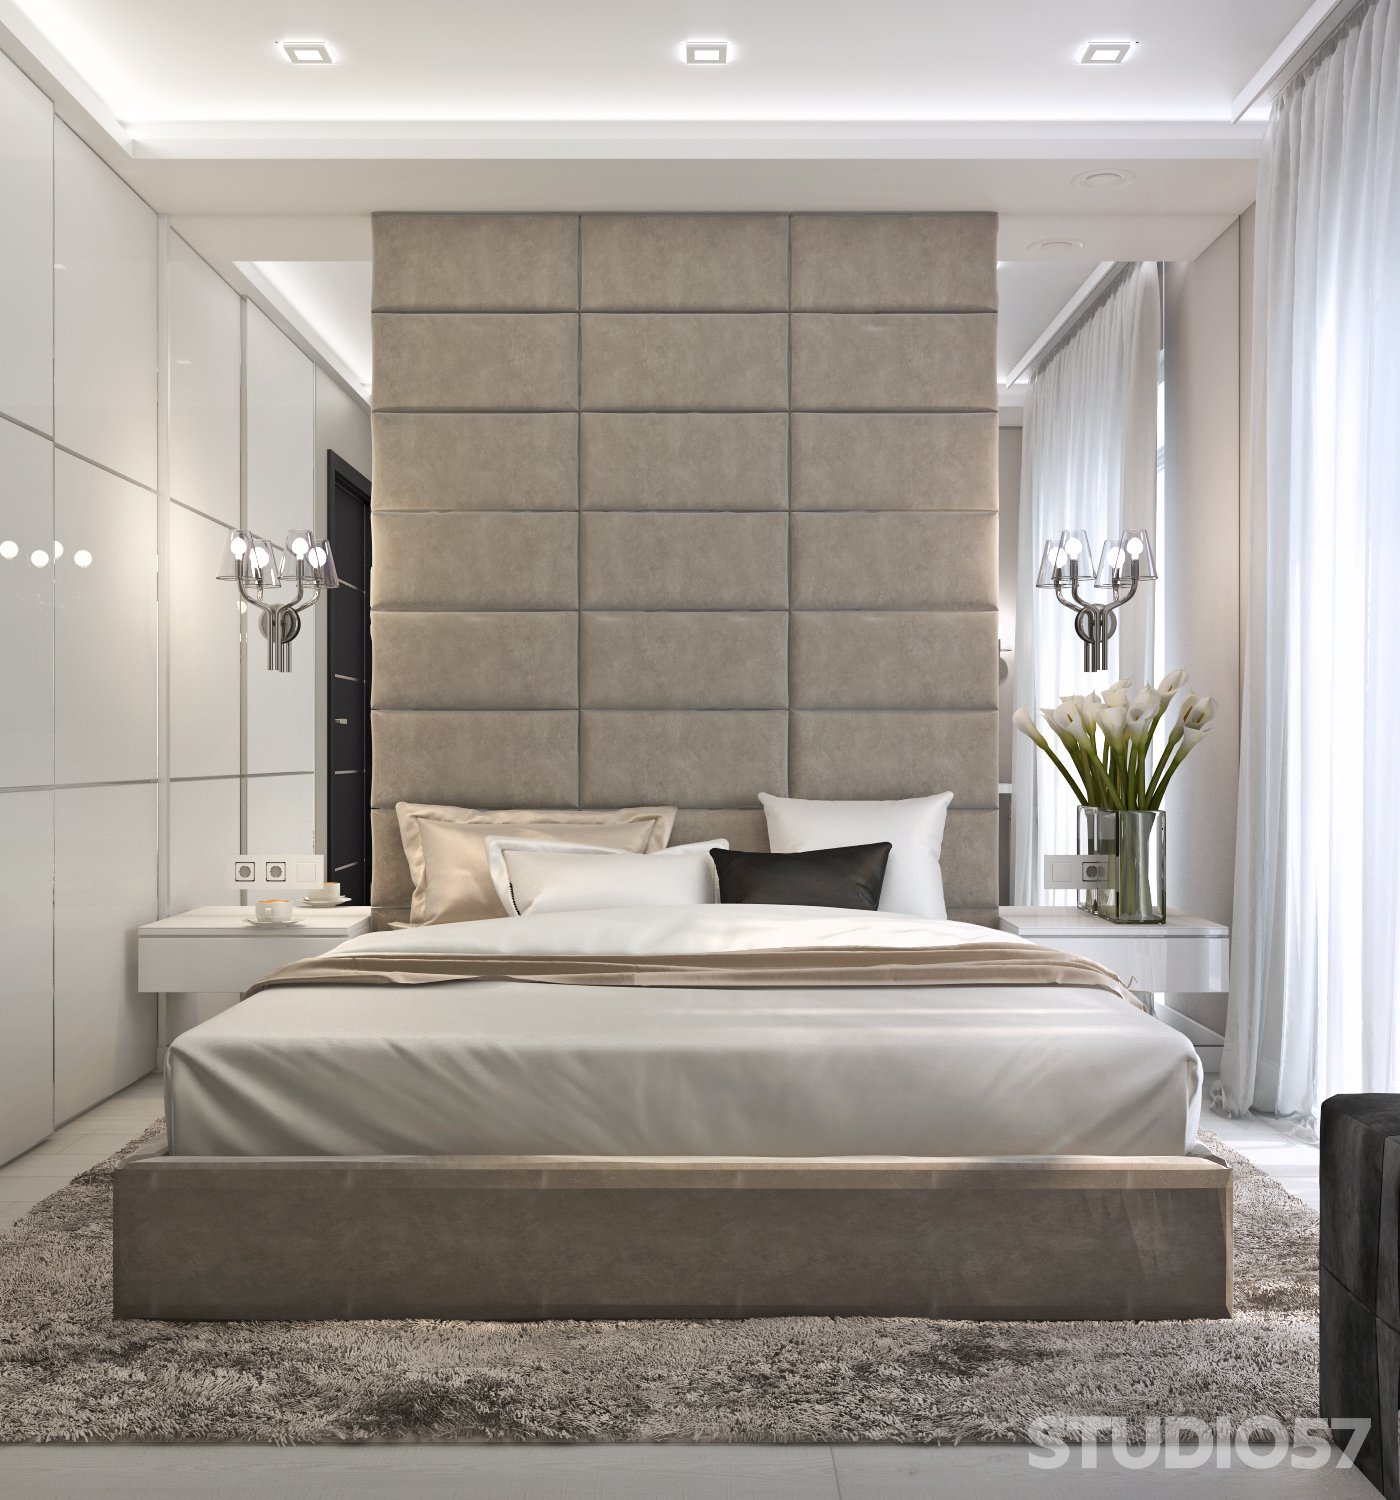 Bedroom in Contemporary style photo